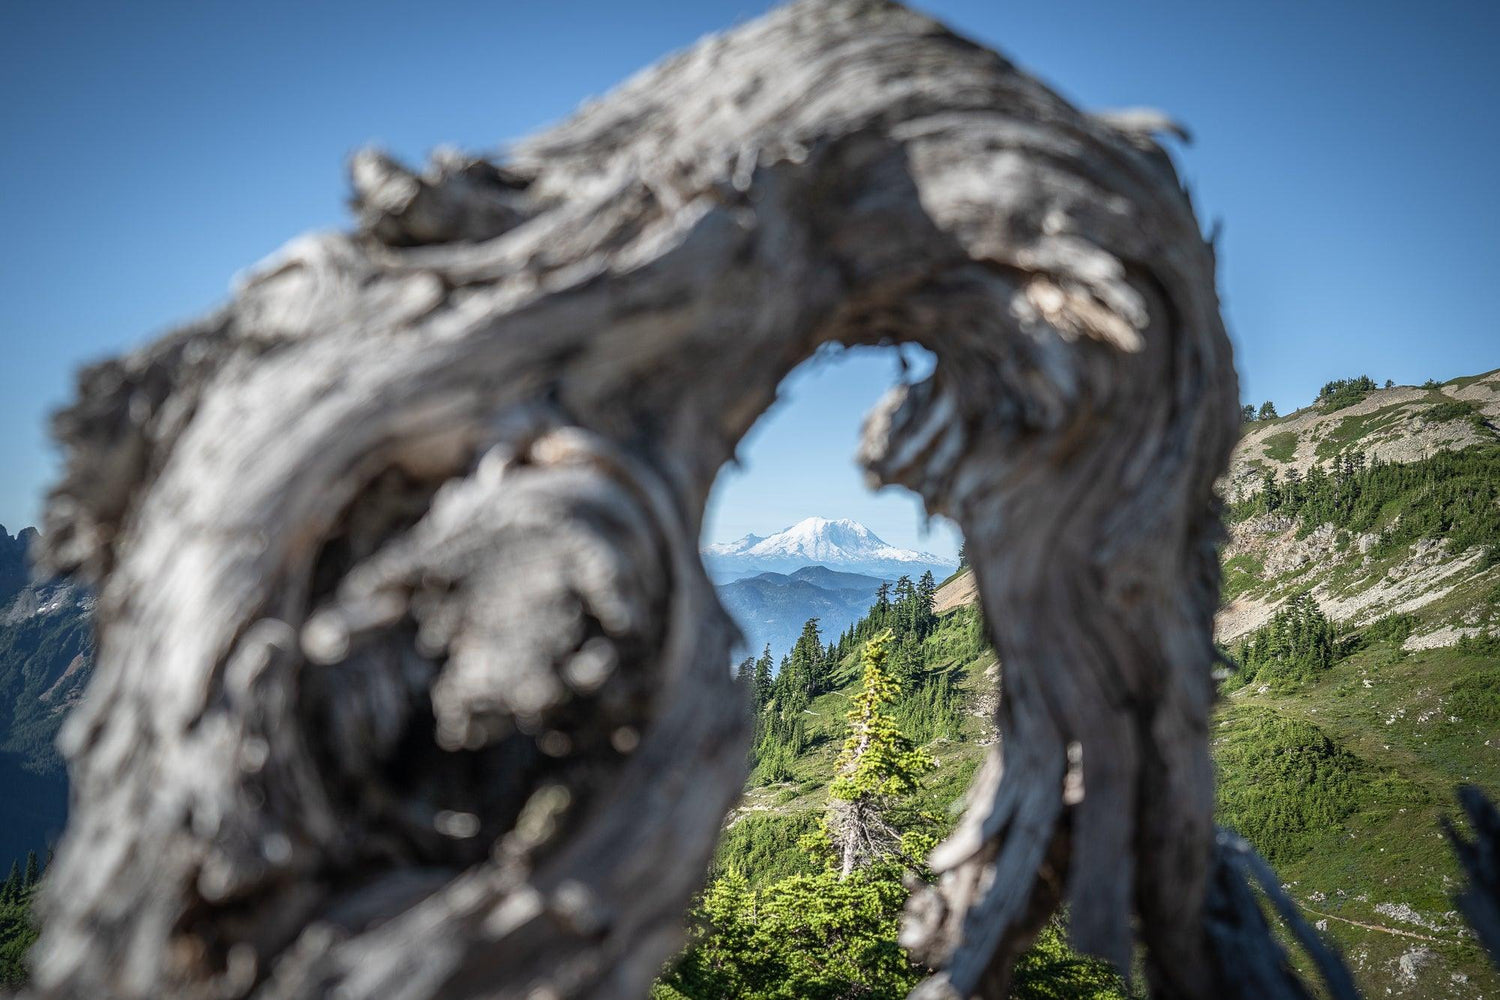 Fine Pacific Crest Trail photography print of Mount Rainier view framed by a wind bent and gnarled tree.